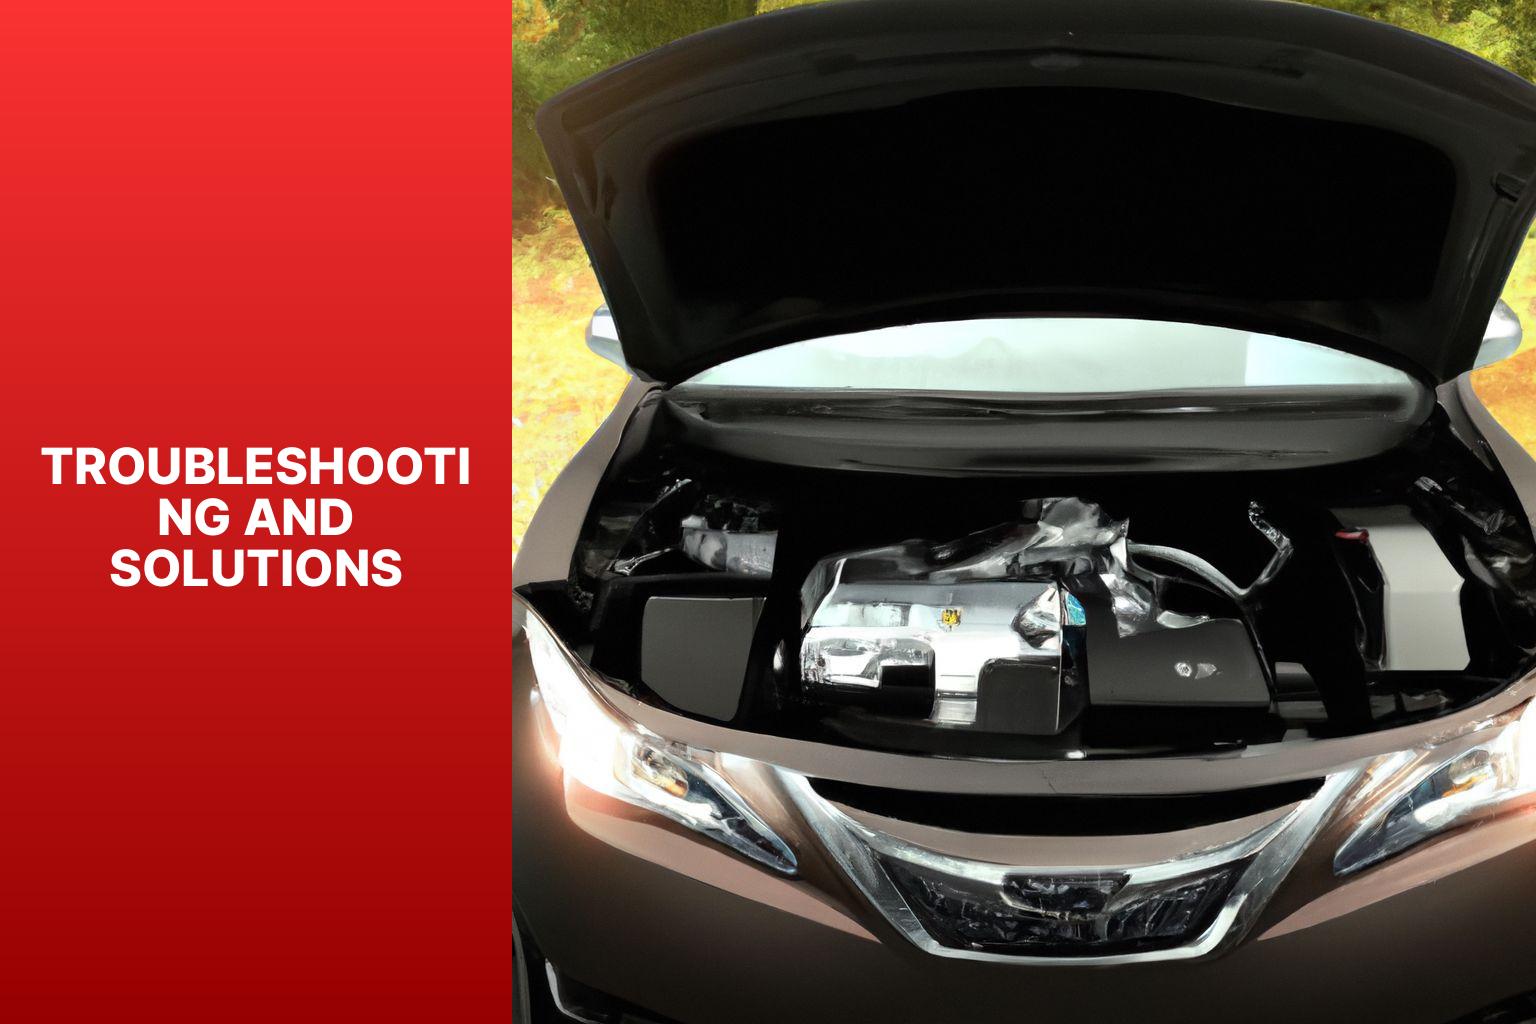 Troubleshooting and Solutions - Solutions for a Stuck Trunk: 2013 Nissan Altima Trunk Won